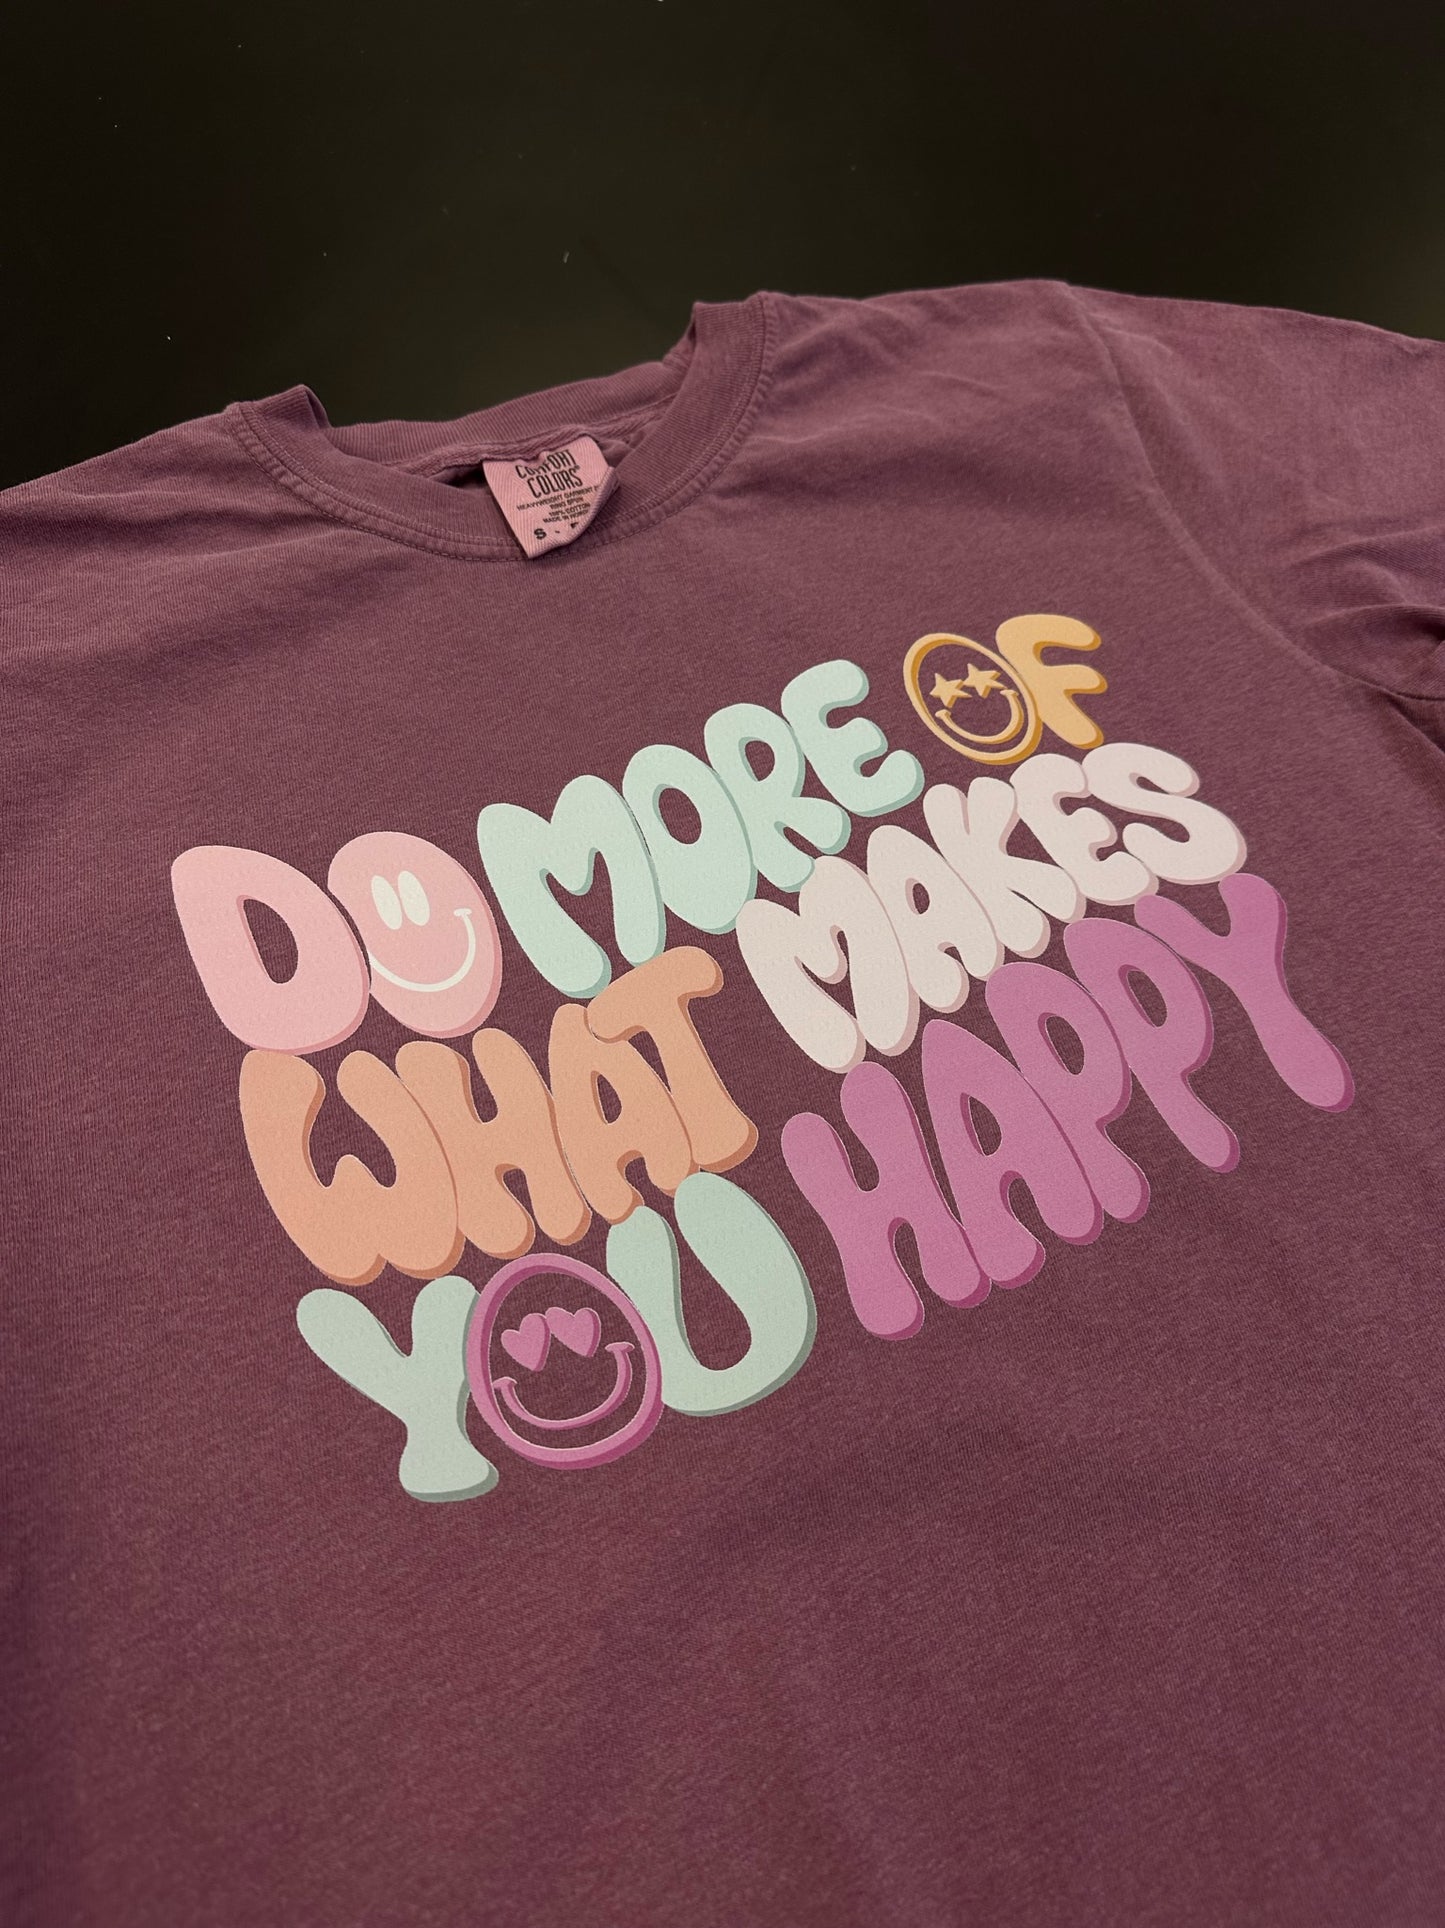 Do more of what makes you happy - Retro